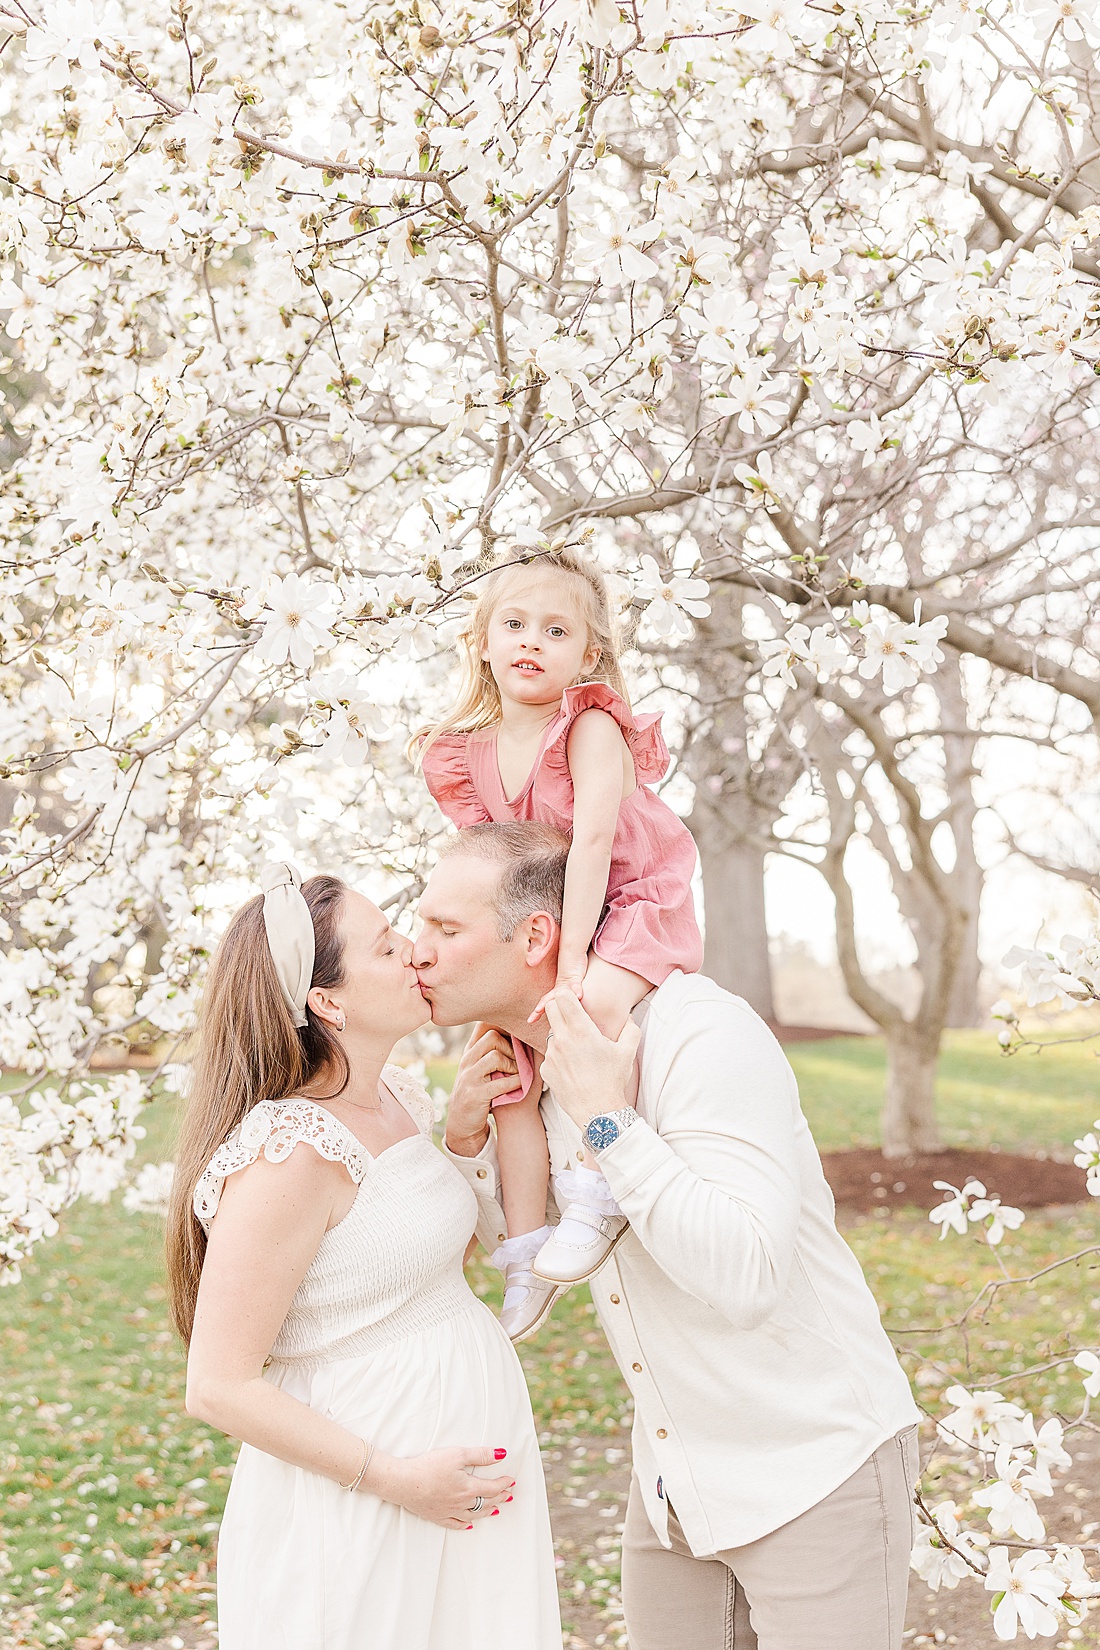 Spring blossom Maternity session at Wellesley town hall with Sara Sniderman Photography